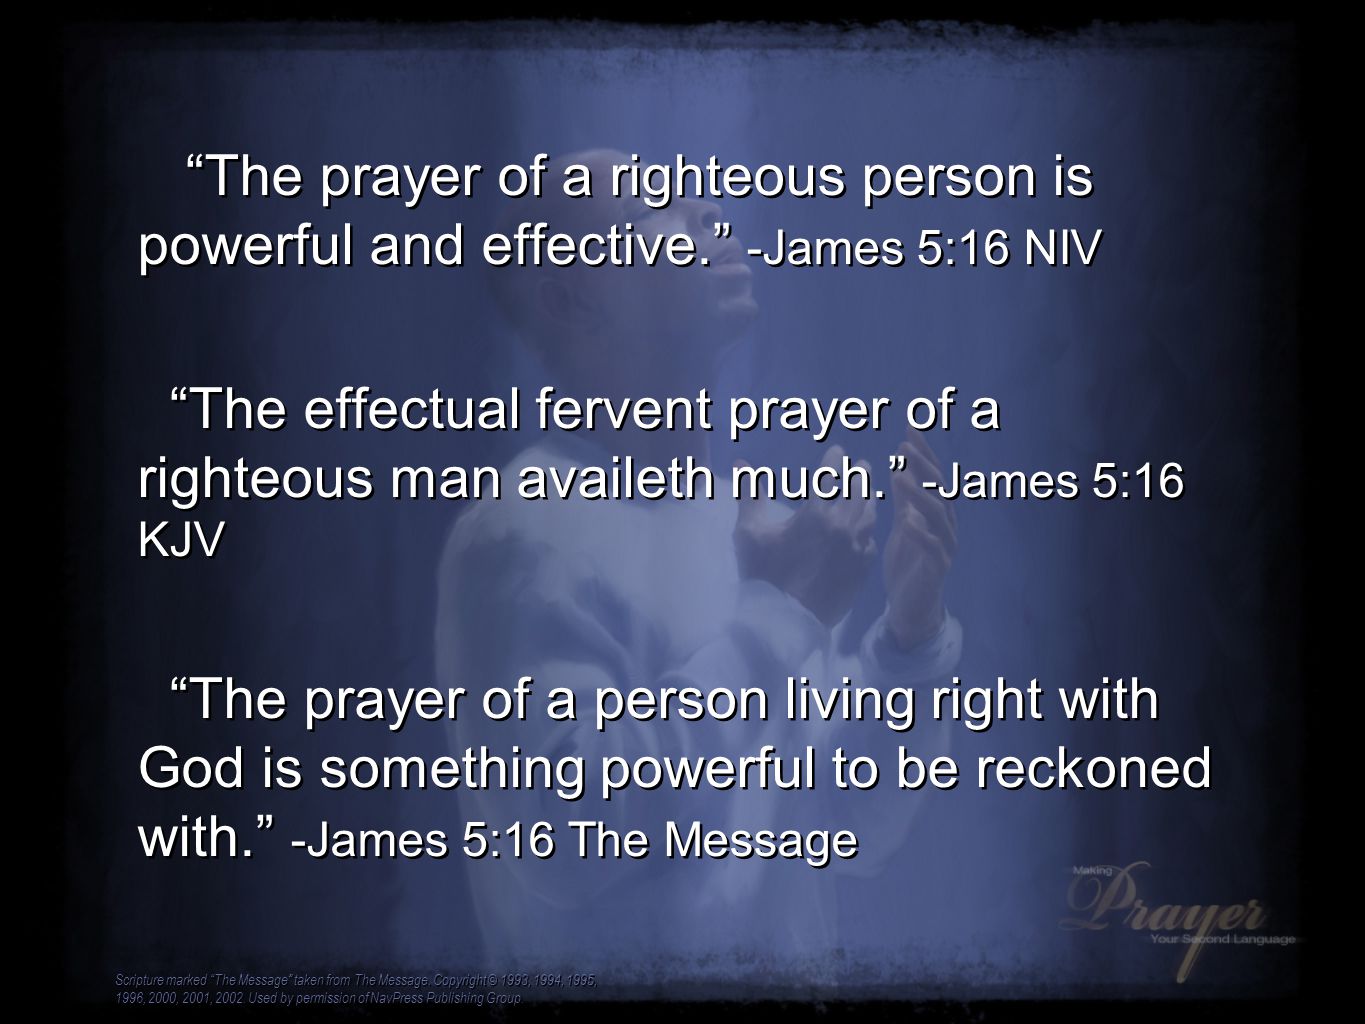 The prayer of a righteous person is powerful and effective. -James 5:16 NIV The effectual fervent prayer of a righteous man availeth much. -James 5:16 KJV The prayer of a person living right with God is something powerful to be reckoned with. -James 5:16 The Message The prayer of a righteous person is powerful and effective. -James 5:16 NIV The effectual fervent prayer of a righteous man availeth much. -James 5:16 KJV The prayer of a person living right with God is something powerful to be reckoned with. -James 5:16 The Message Scripture marked The Message taken from The Message.